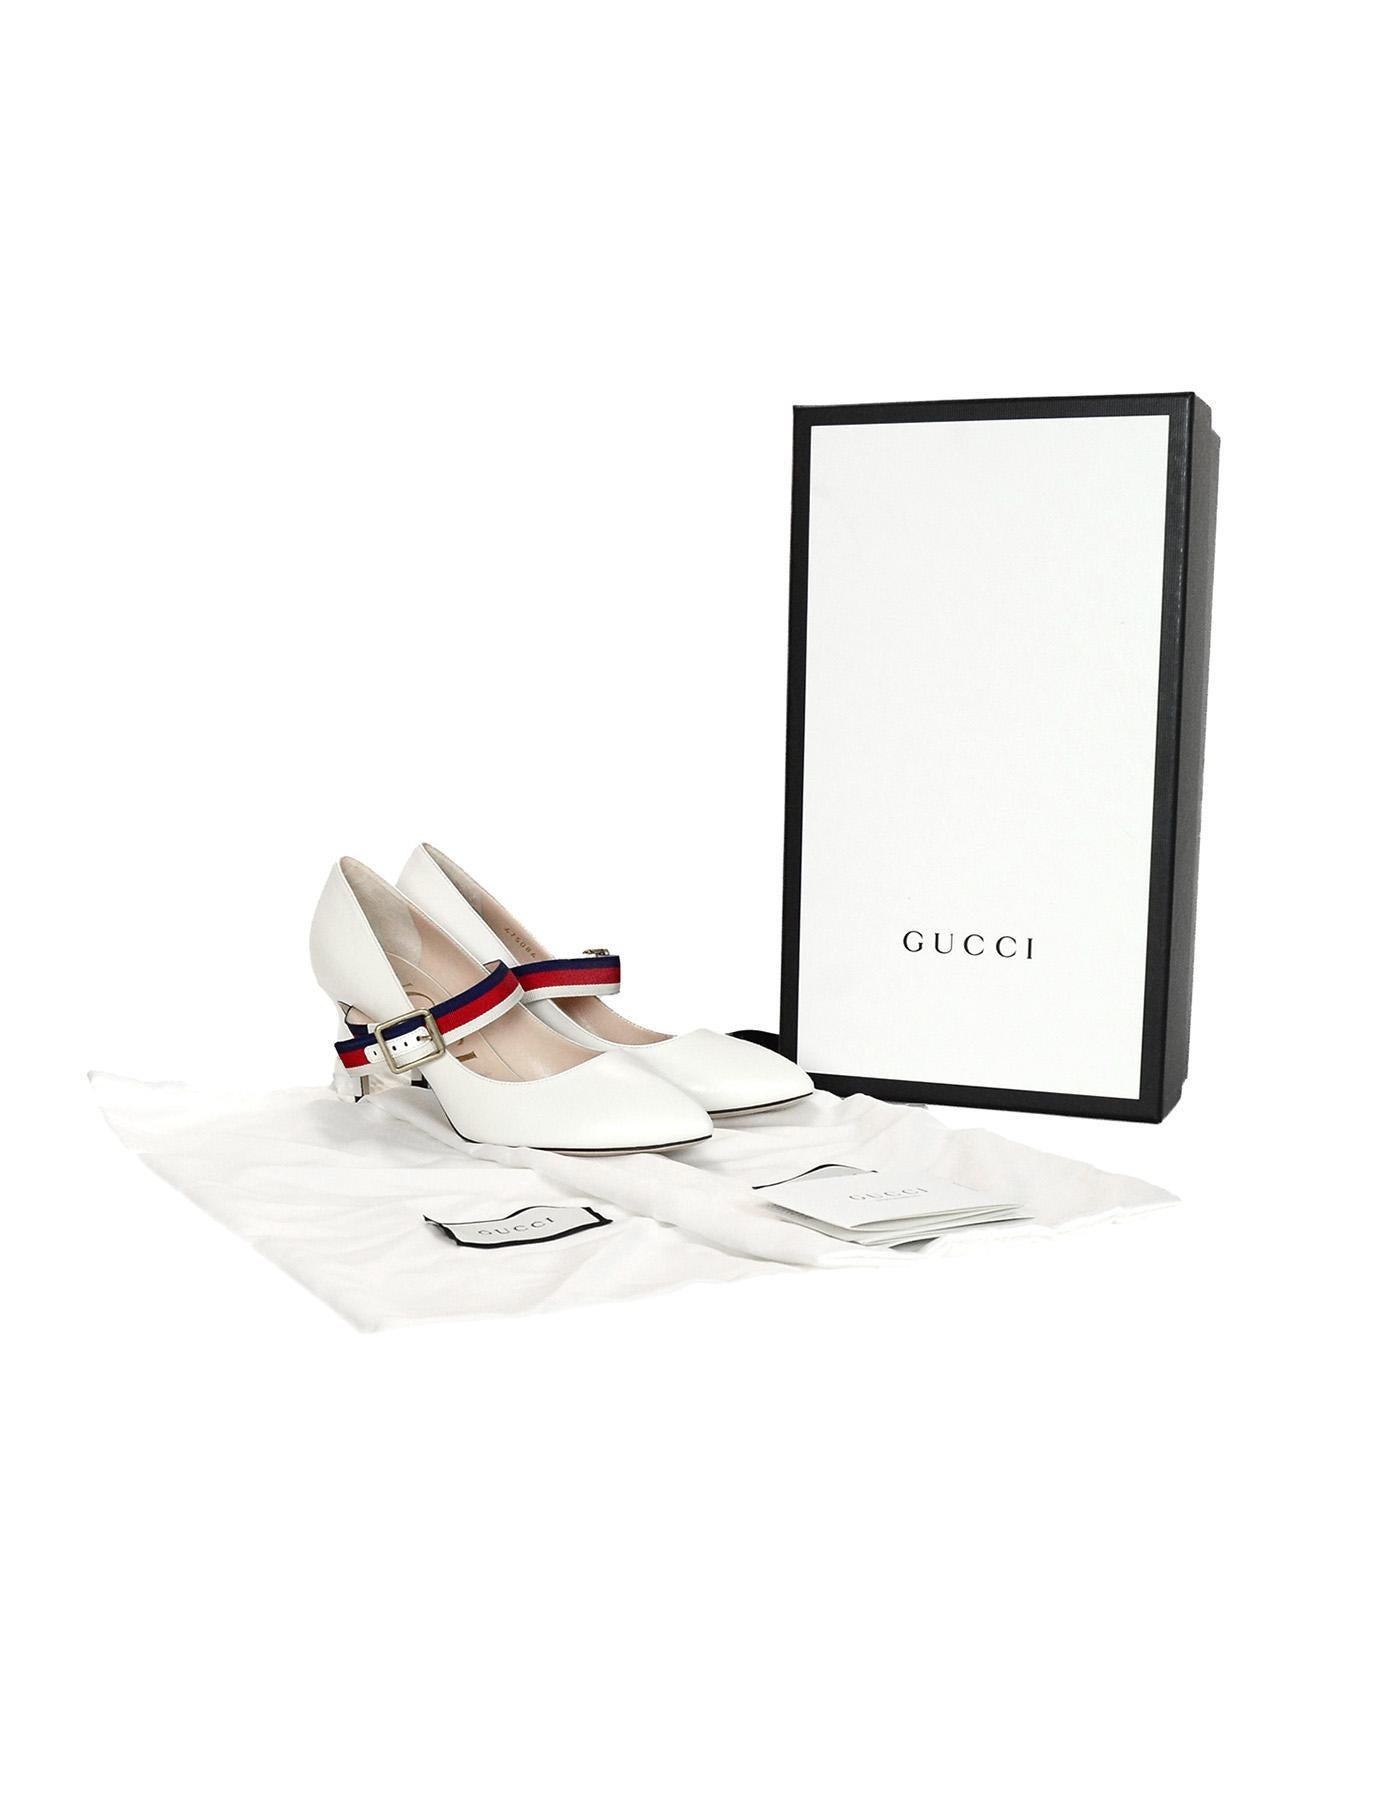 Gucci NEW White Leather Sylvie Grosgrain-Trimmed Red/Blue Web Pumps Sz 37.5 W/ Box & Two Dust Bags

Made In: Italy
Color: White with red and blue grosgrain-trimmed 
Hardware: Goldtone
Materials: Leather and grosgrain-trim
Closure/Opening: Side